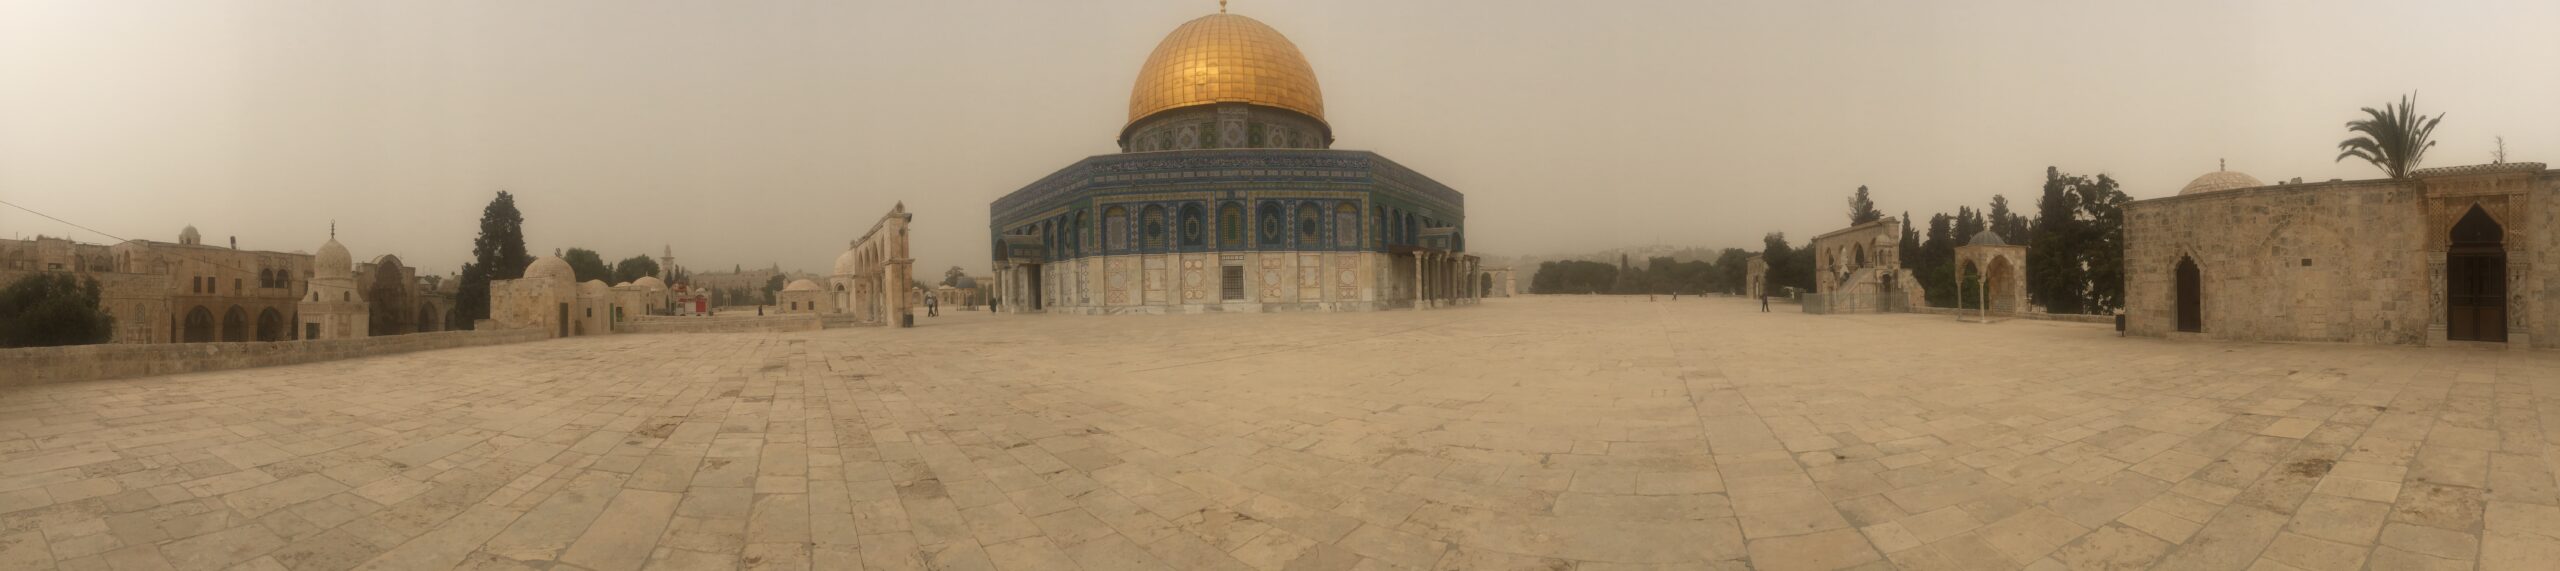 Panoramic view of the Dome of the Rock mosque